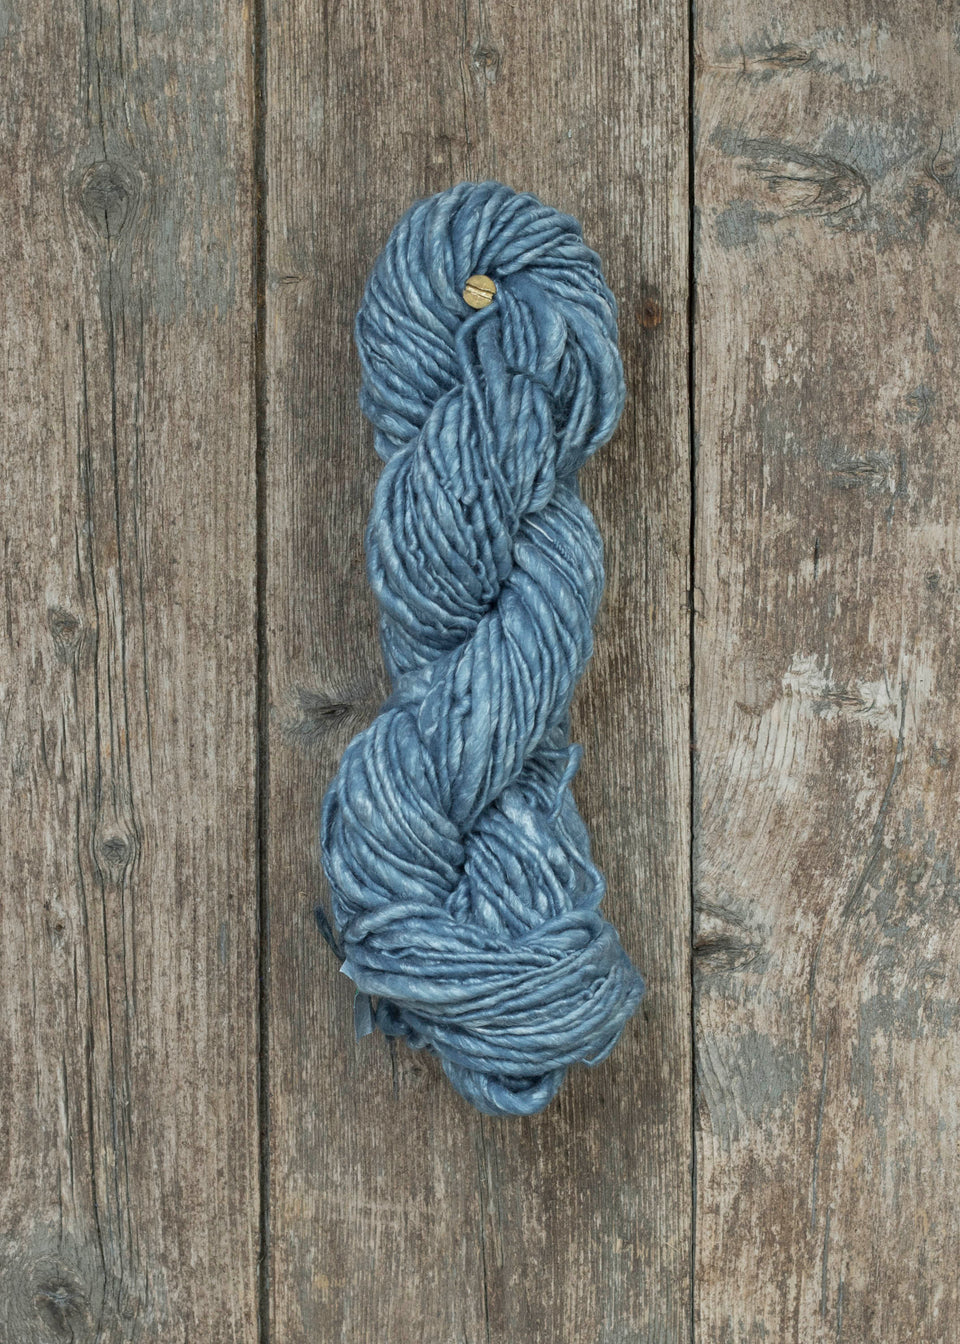 handspun, hand-dyed skein of yarn in silvery indigo. the yarn is Silk/Kid Mohair/Bluefaced Leicester mix.